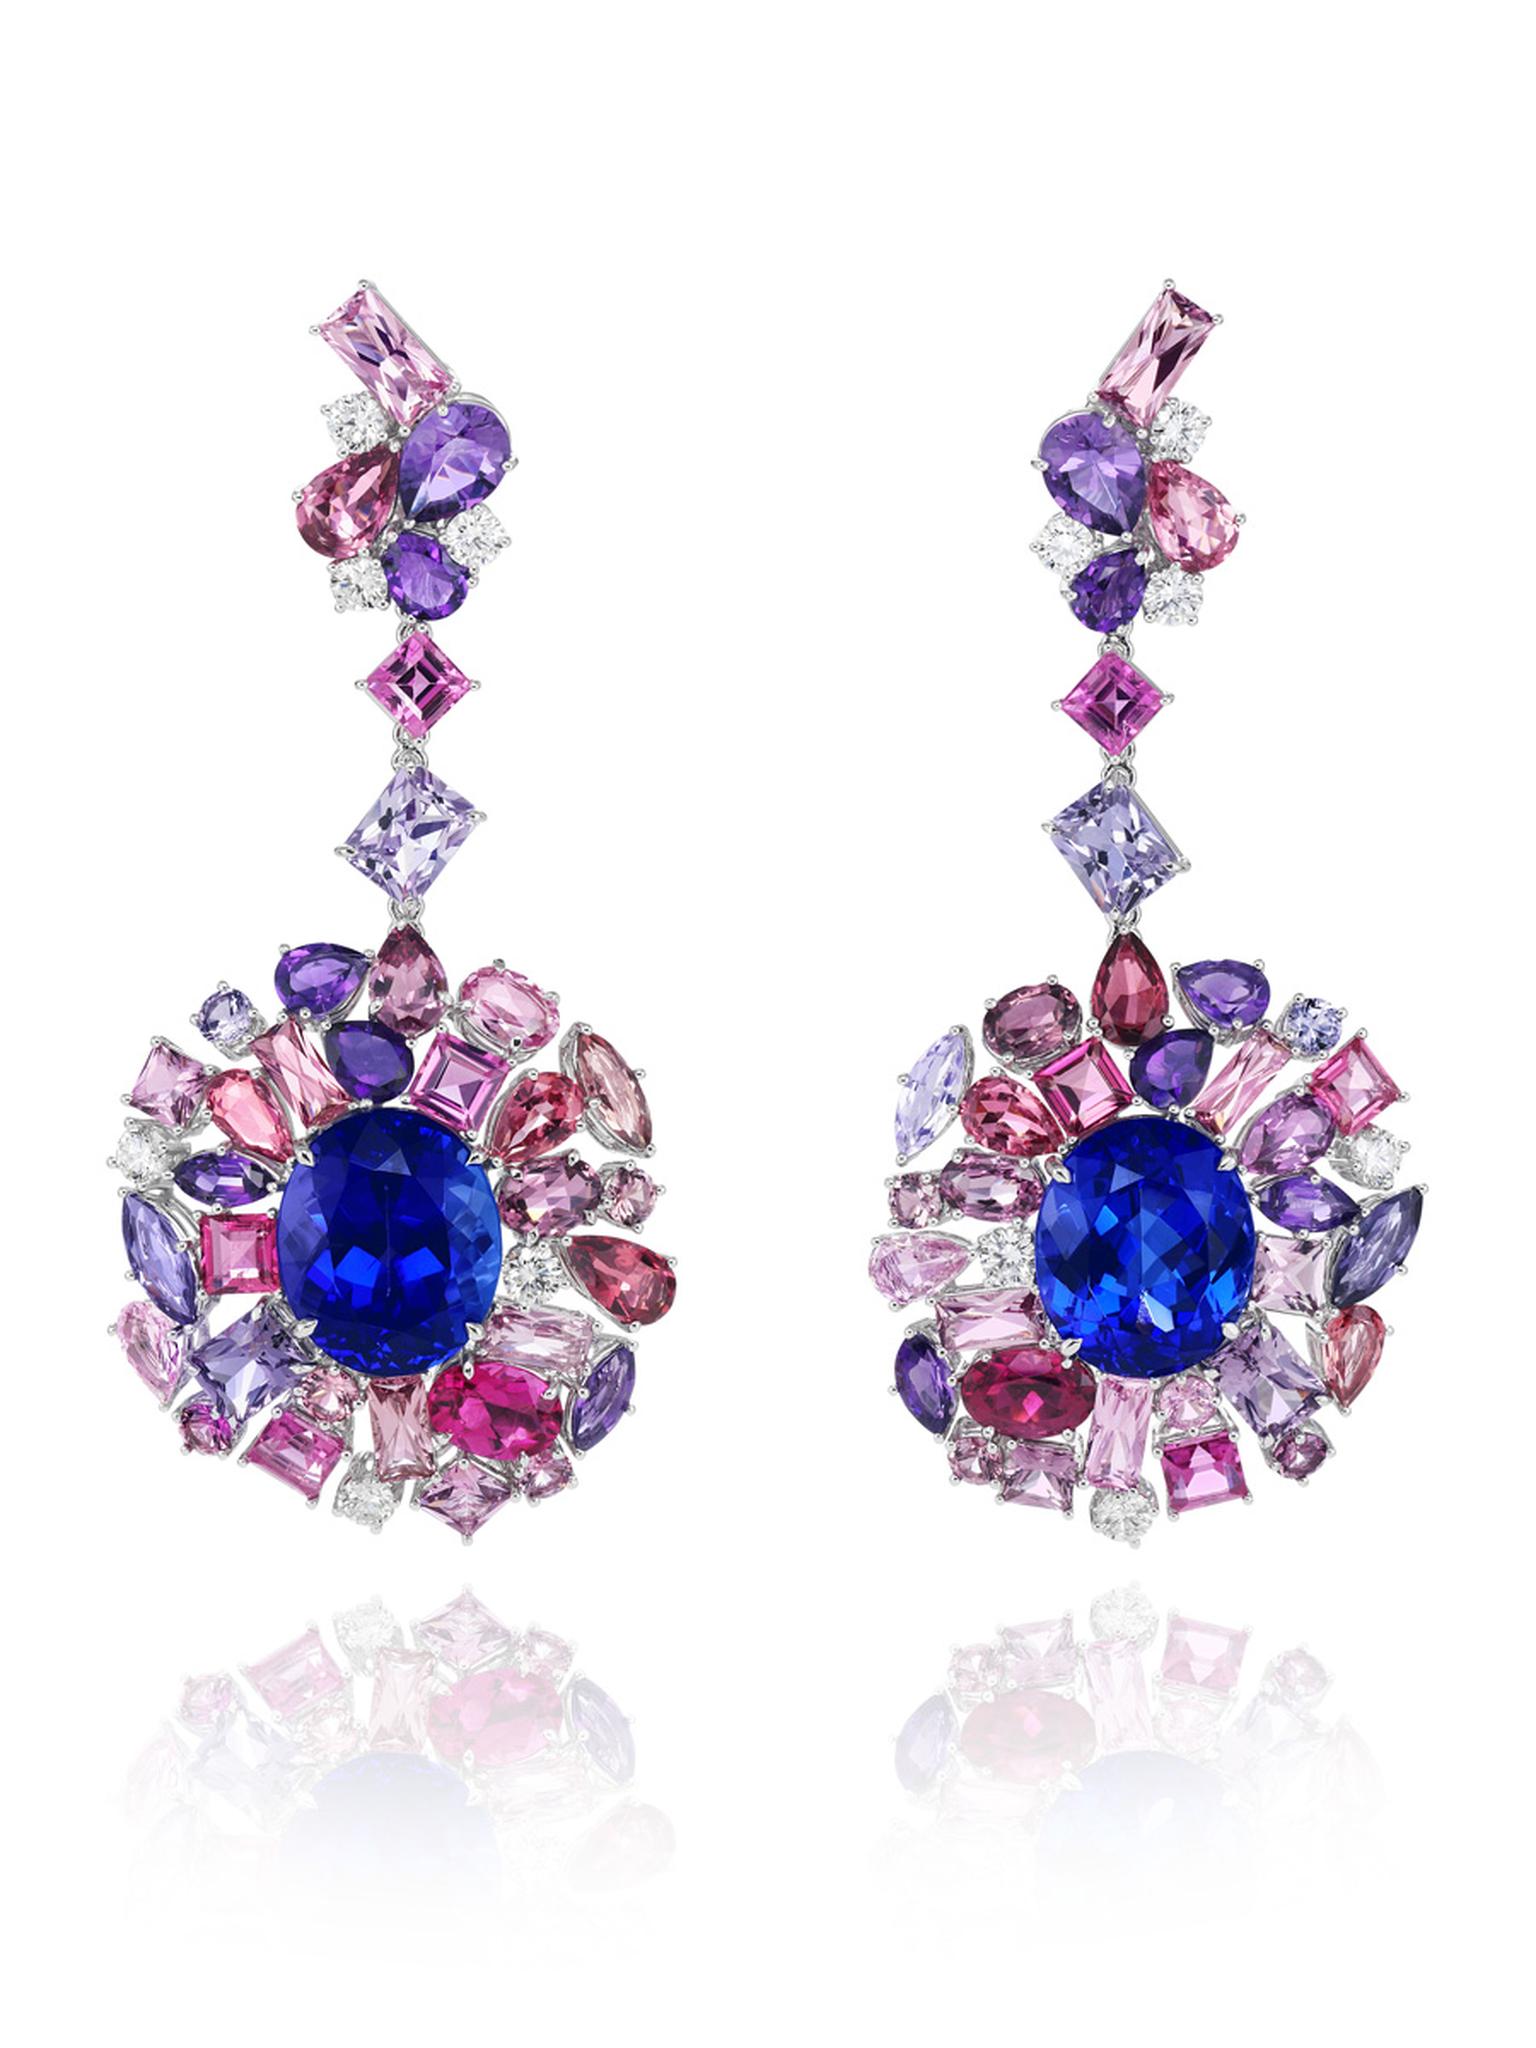 Chopard-Tanzanite-Earrings--from-the-Red-Carpet-Collection-2013.jpg